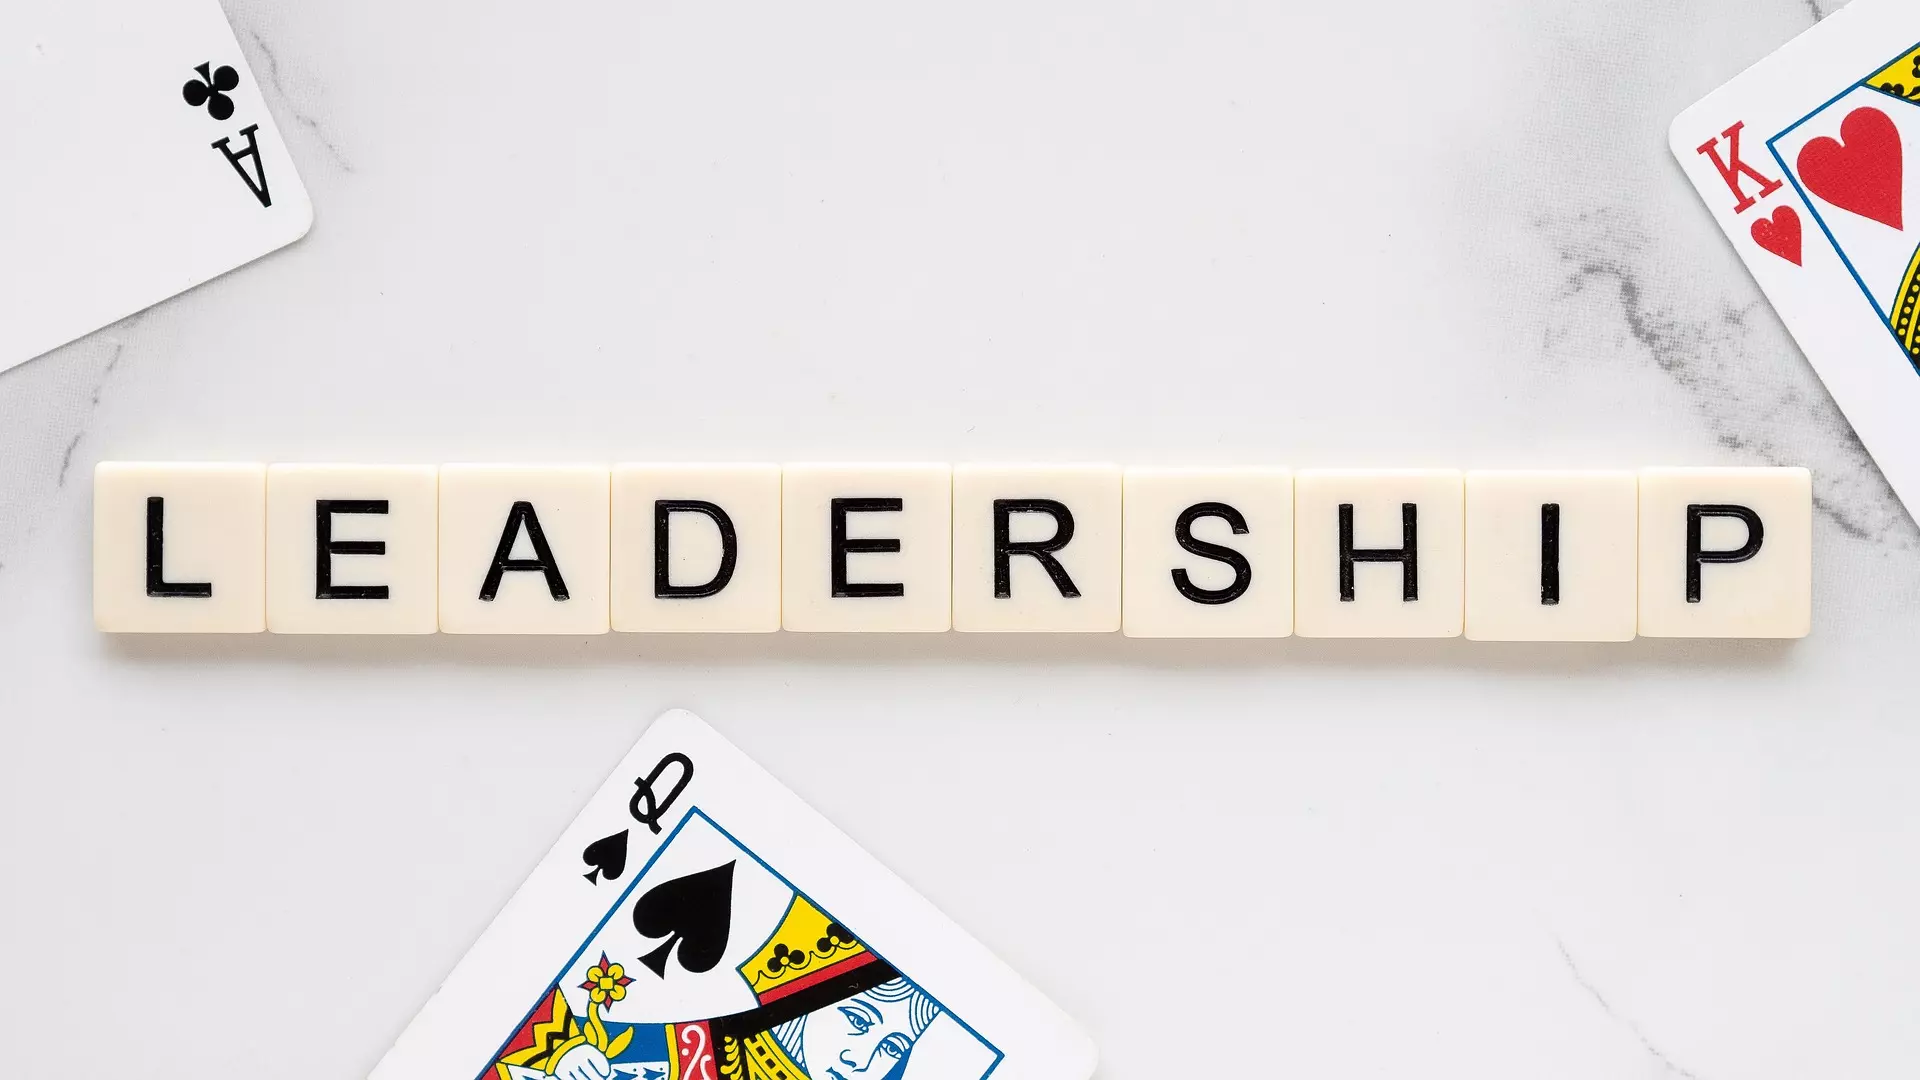 The word 'Leadership' spelled out in Scrabble tiles and surrounded by playing cards